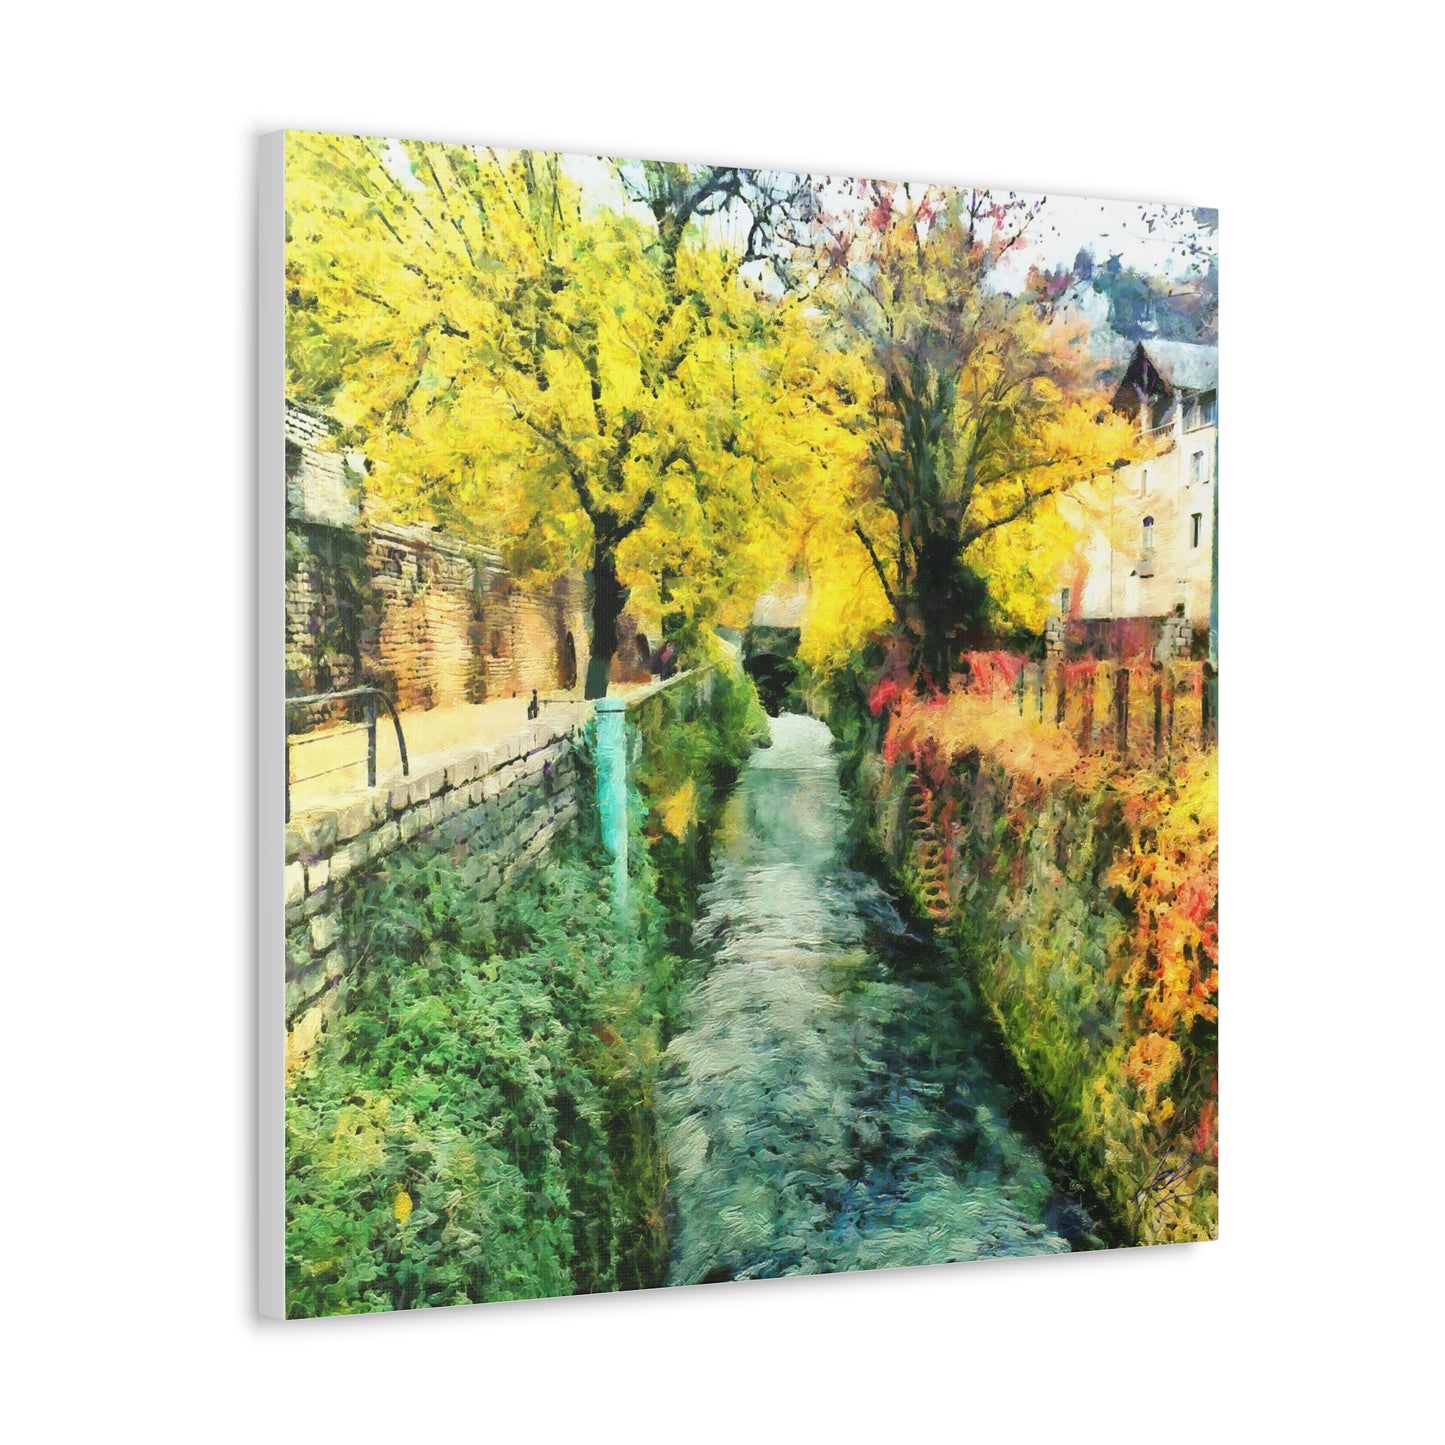 Autumn Leaves - shipped from USA